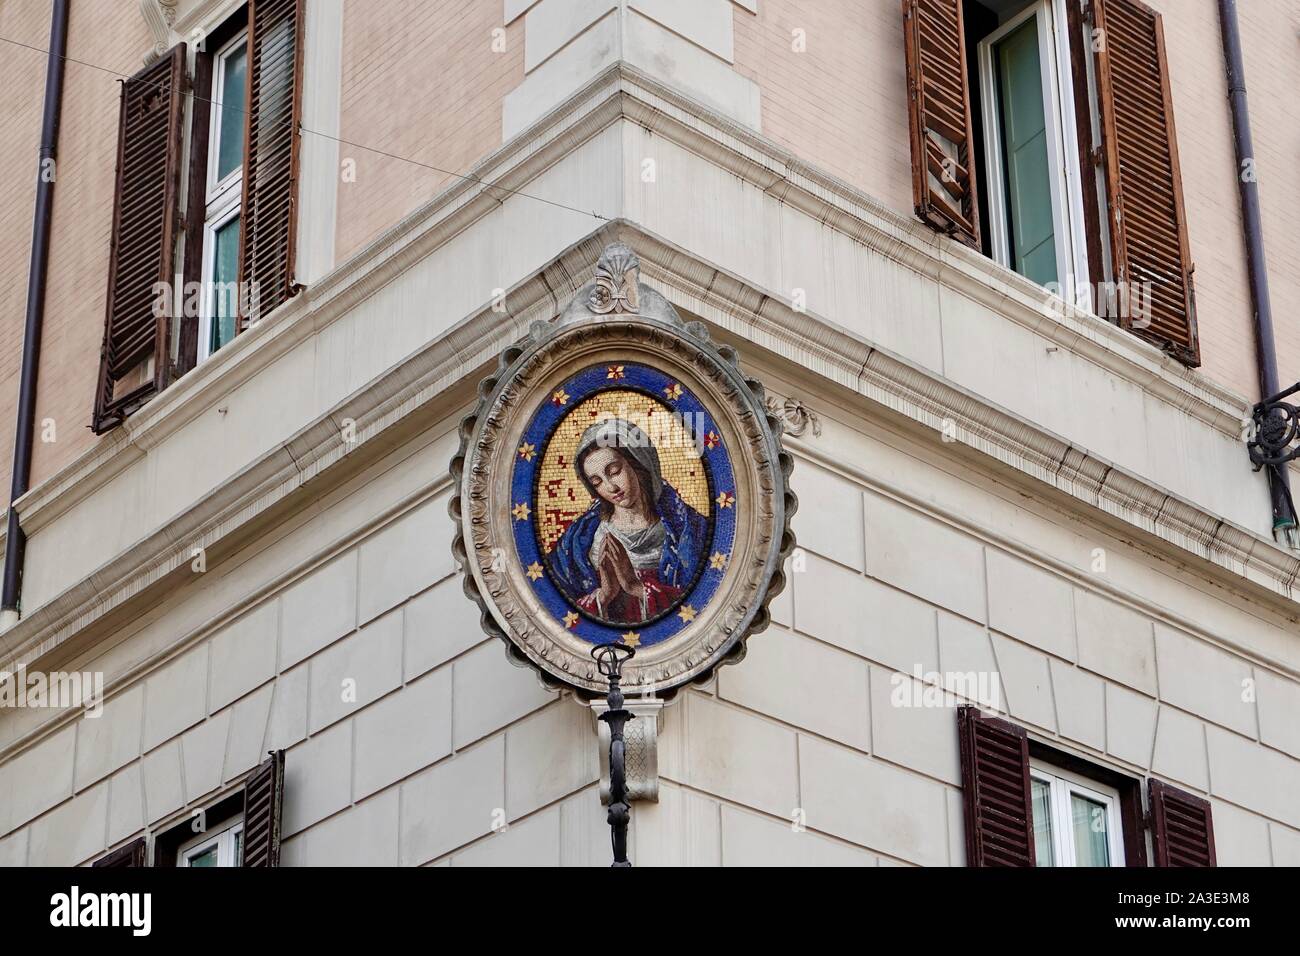 Madonnella, mosaic of the Virgin Mary as protector, mother of God, on the corner of a building in the edge of the Piazza Campo De Fiori, Rome, Italy. Stock Photo